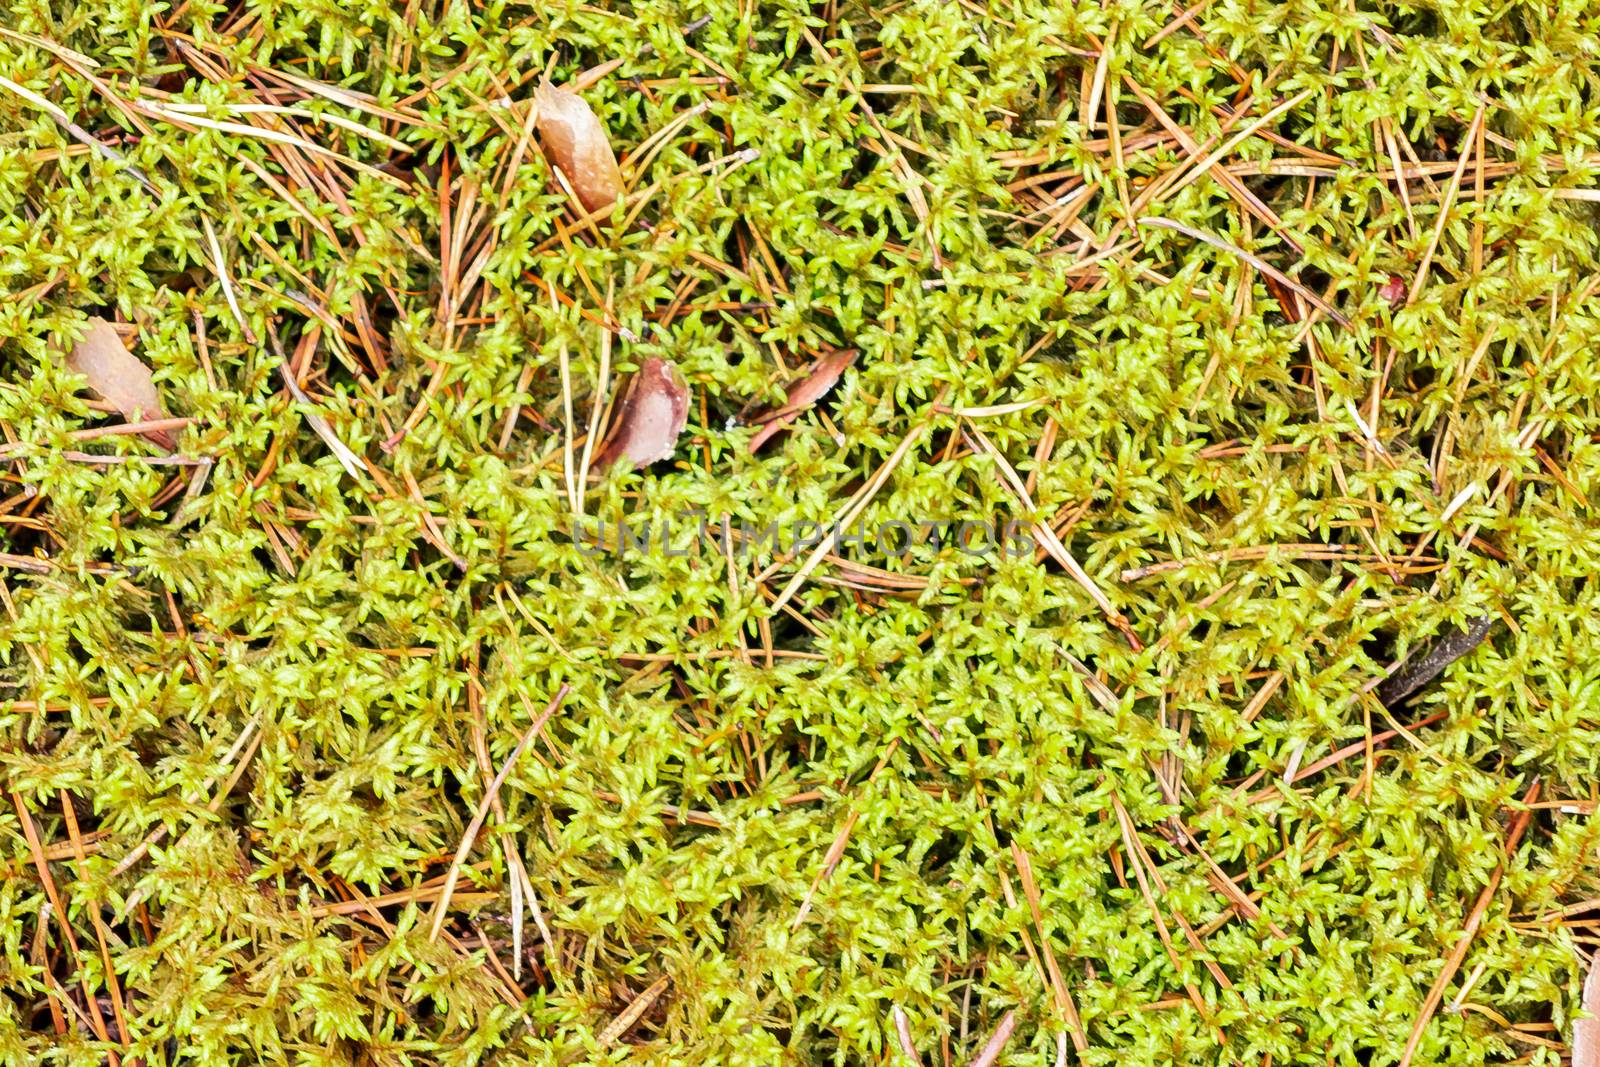 Texture of the forest floor - green sphagnum moss and pine needles by galsand